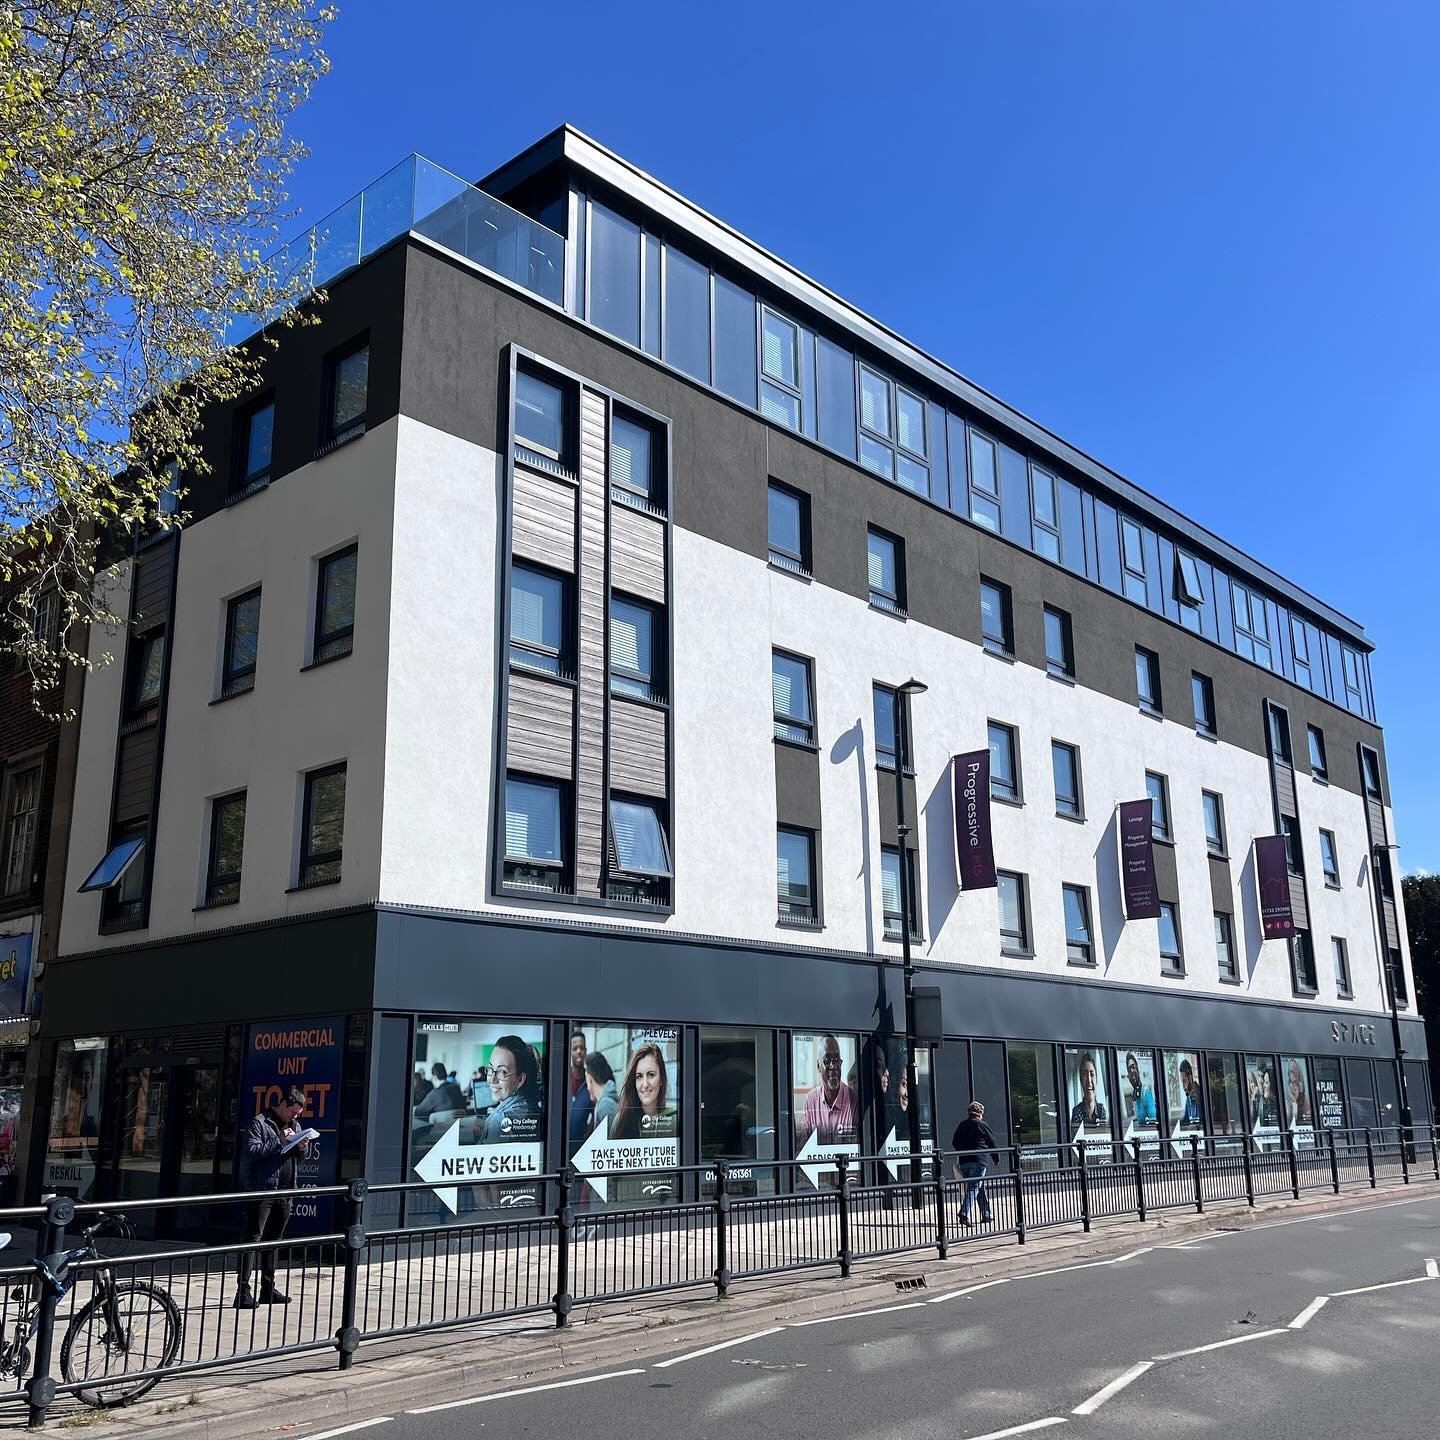 Check out the amazing frontage opportunity along Bourges Boulevard for the potential occupier at this fantastic commercial unit, available to let - SPACE Building, 61 Bridge Street, PE1, Peterborough, PE1 1HA - 2,118 sq ft ground floor space and awes